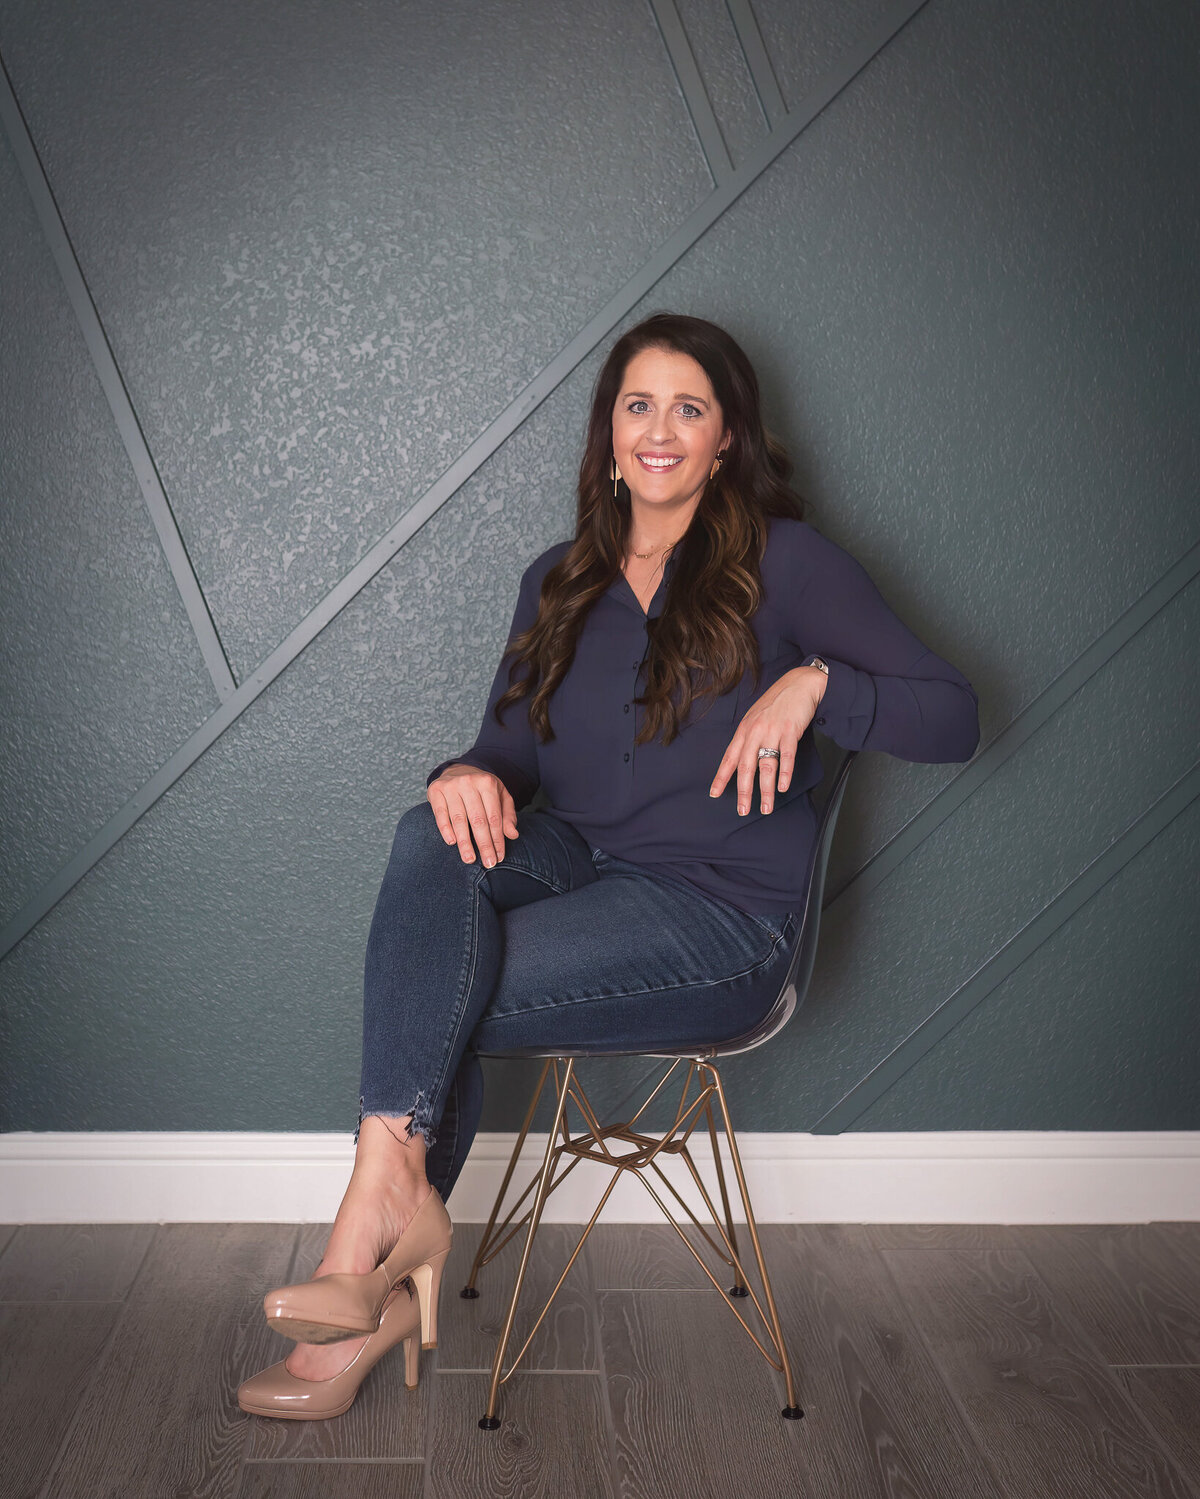 woman sitting in a clear chair with gold legs, looking happy and confident posing for an on-location branding headshot